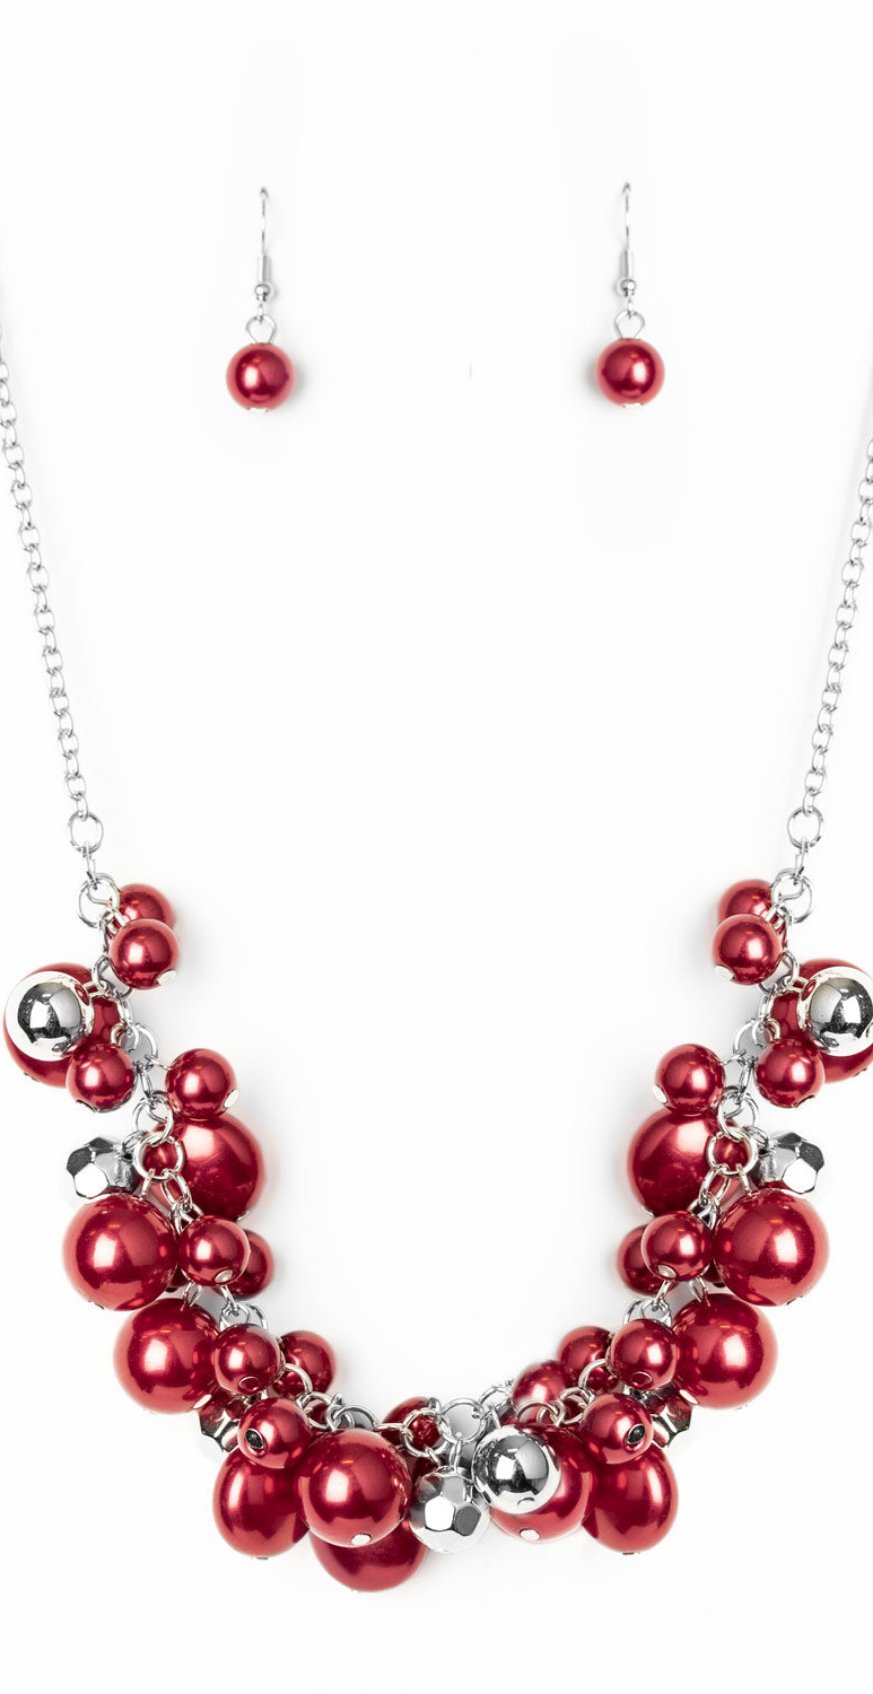 Battle of the Bombshells Red Necklace and Earrings (2020 Convention Exclusive)